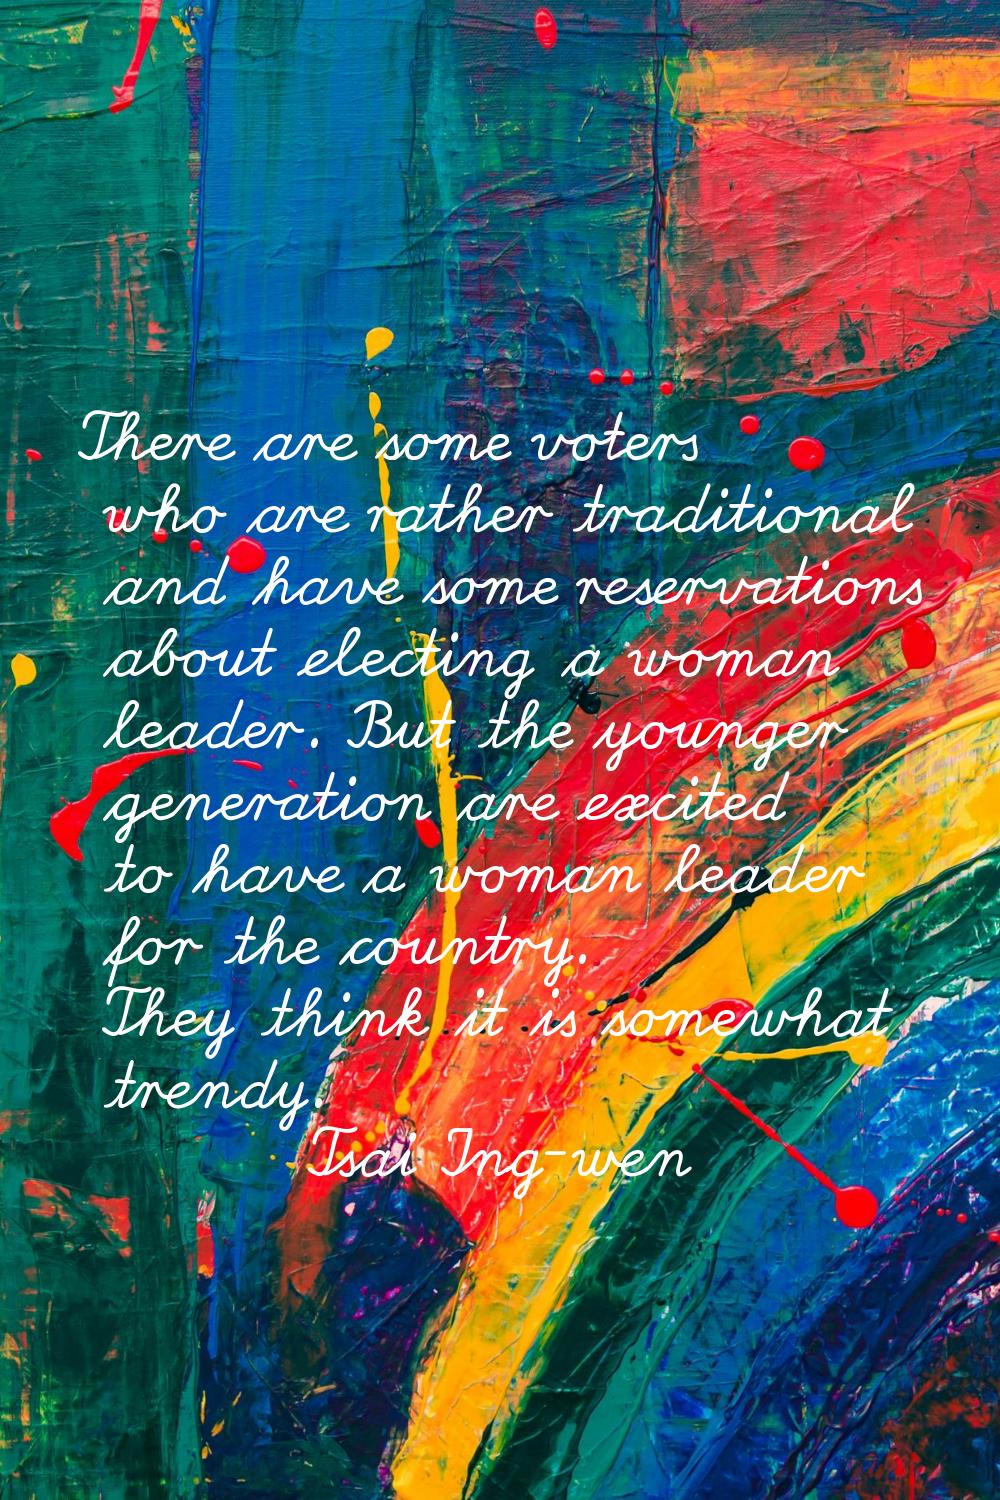 There are some voters who are rather traditional and have some reservations about electing a woman 